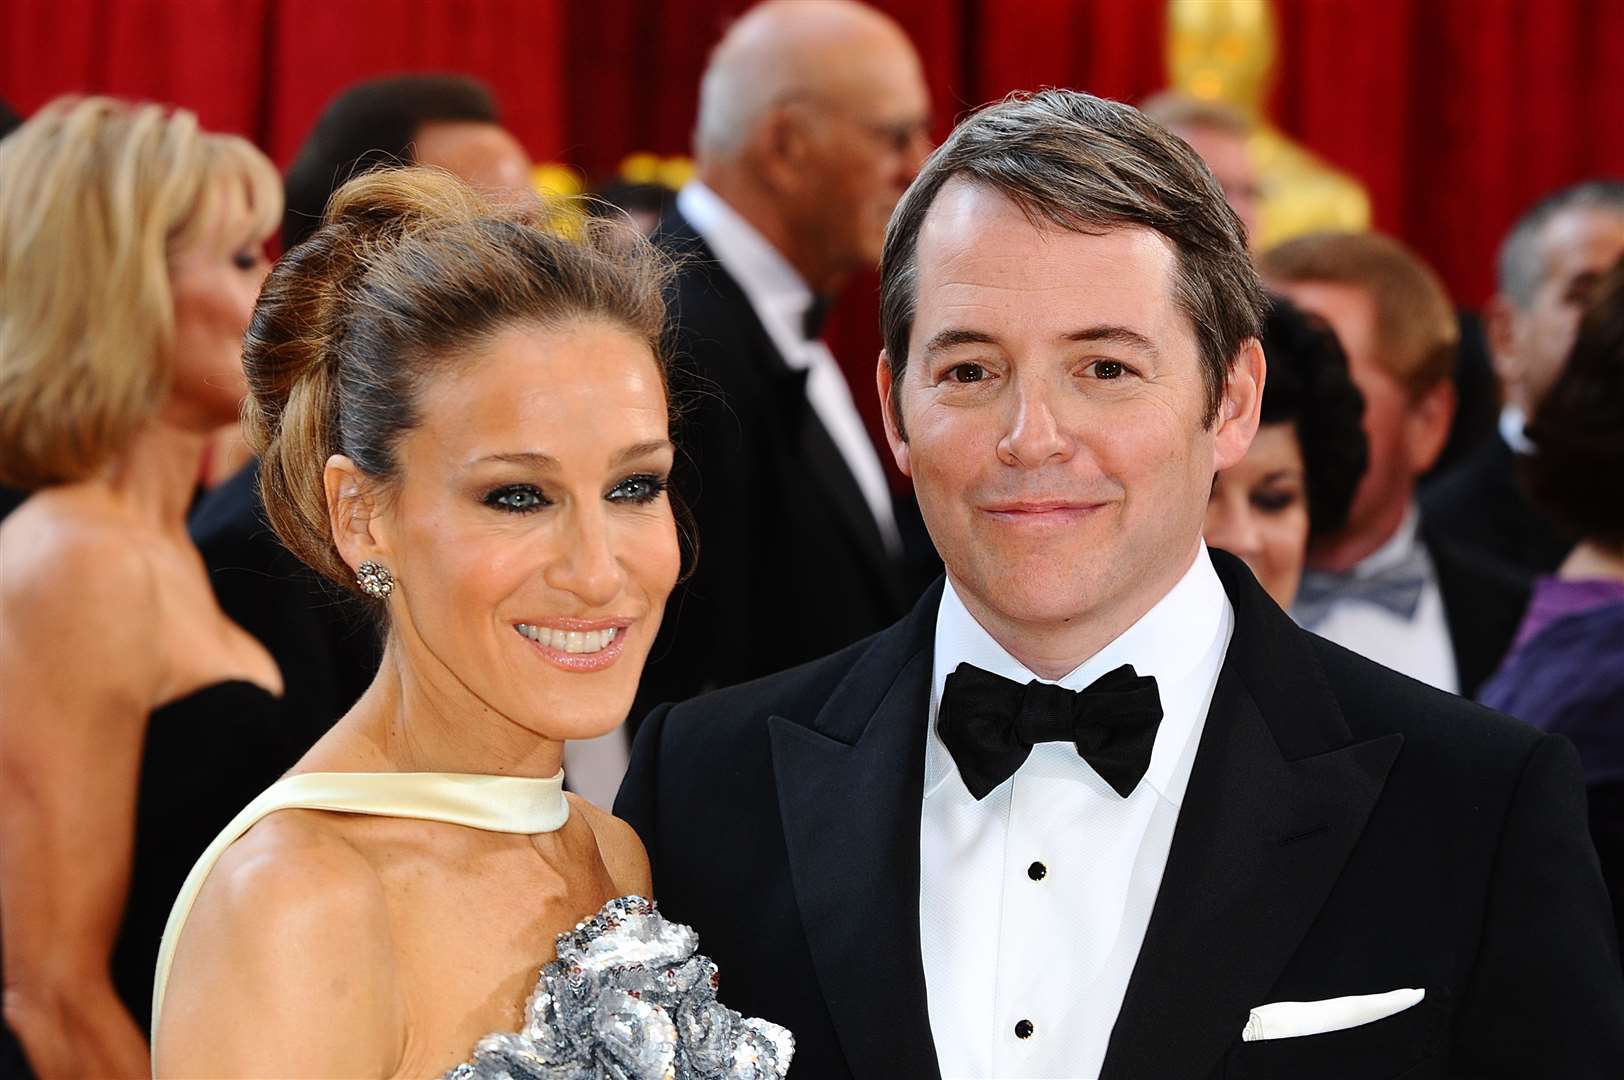 Sarah Jessica Parker and Matthew Broderick arriving at the Academy Awards in Los Angeles in 2009 (Ian West/PA)